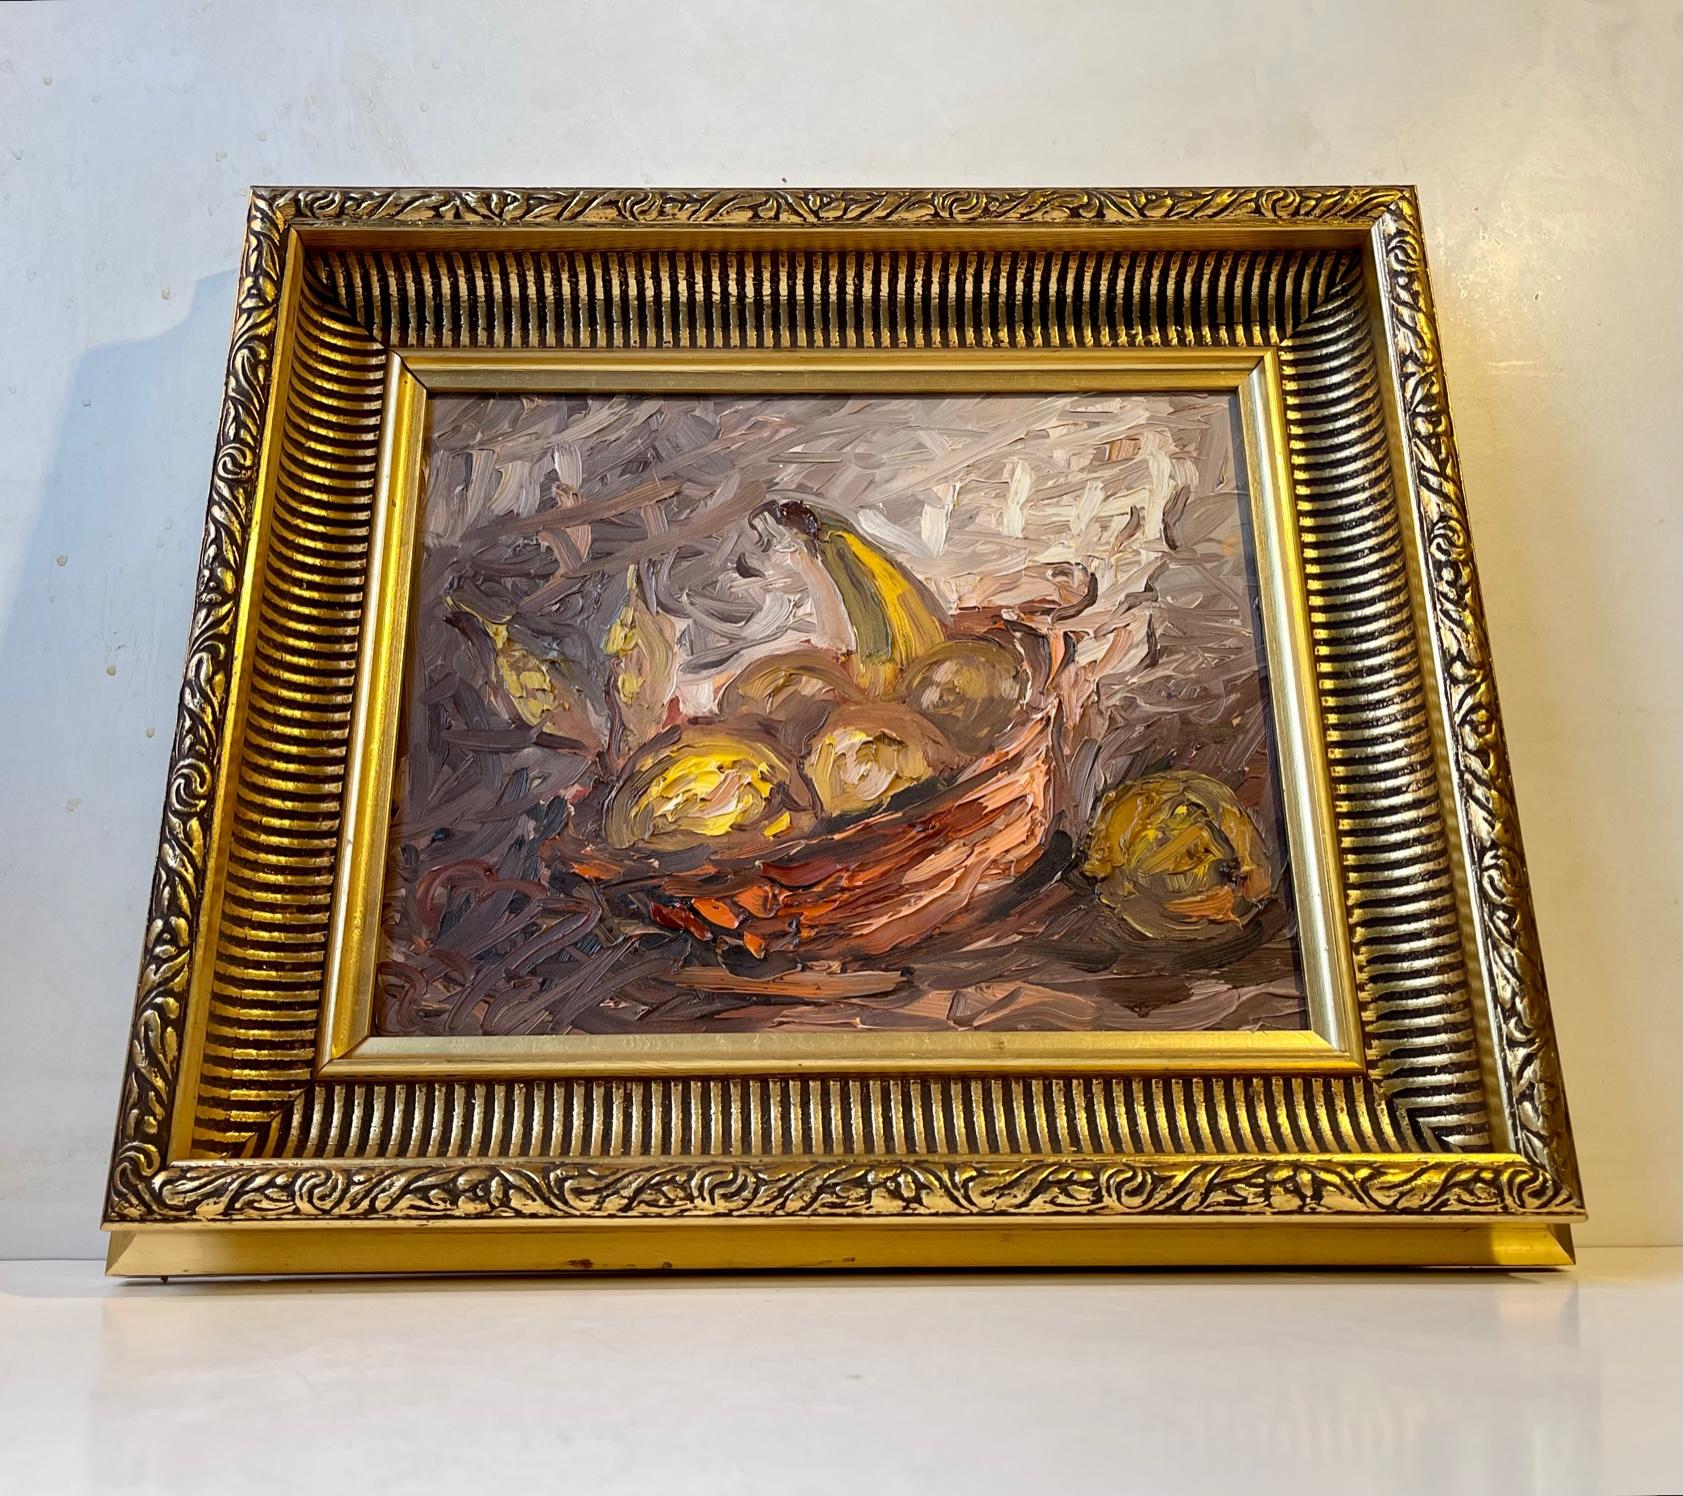 Matching set of 2 oil paintings by the Danish artist J. P. Nielsen. JPN worked out of his studio in Esbjerg, Denmark. These two works: a fruit bowl still life and possibly a self portrait are executed using a palette applying thick layers of paints.